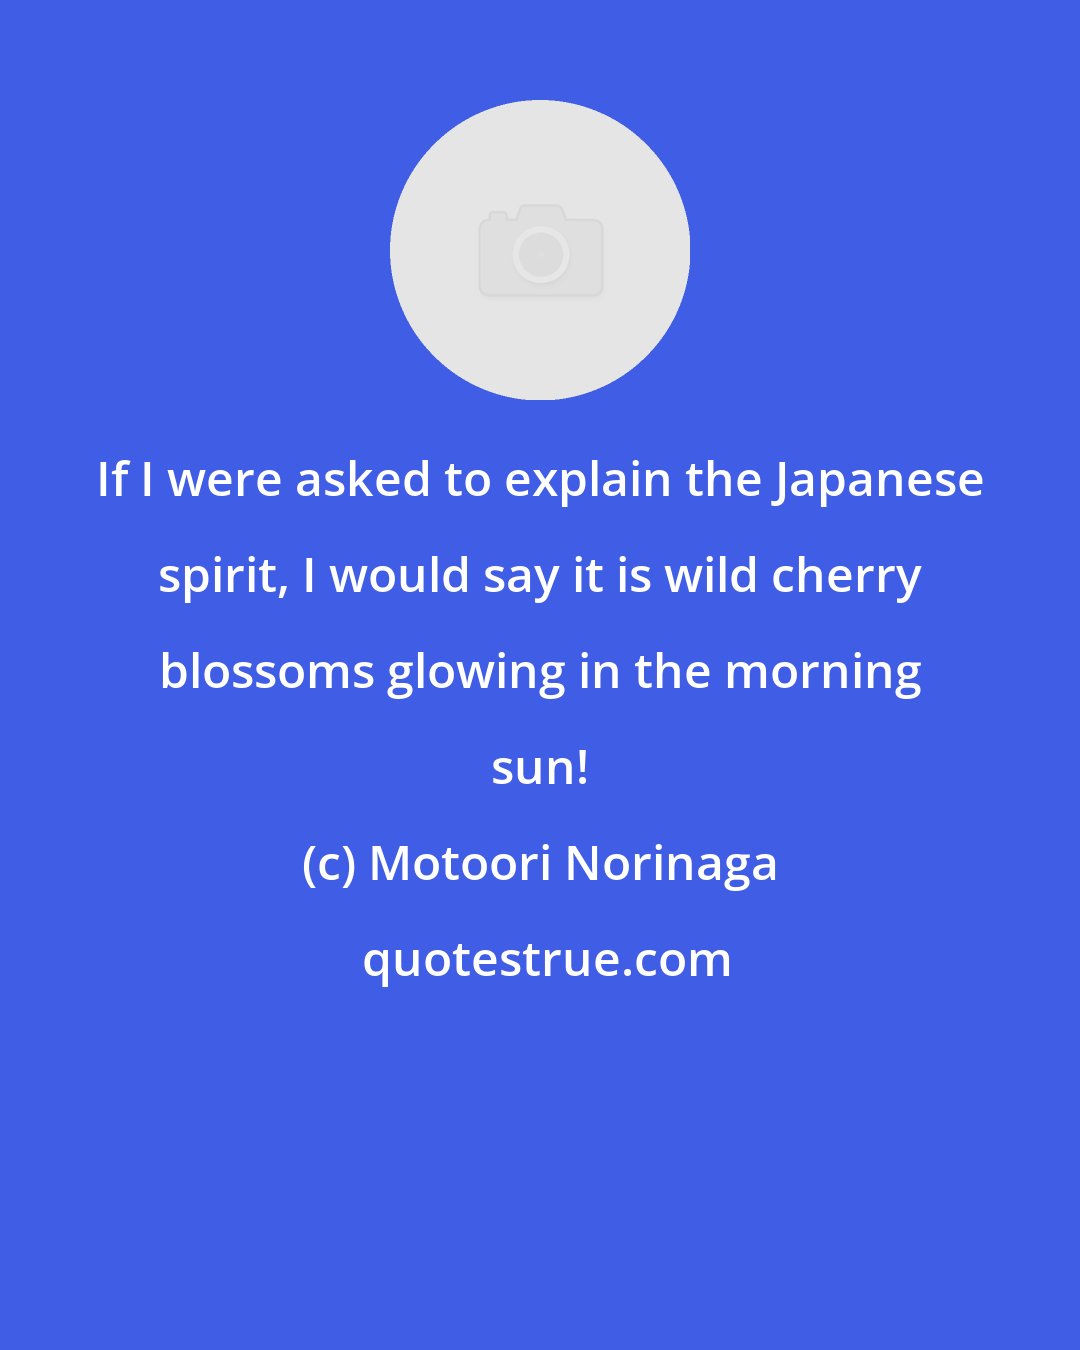 Motoori Norinaga: If I were asked to explain the Japanese spirit, I would say it is wild cherry blossoms glowing in the morning sun!